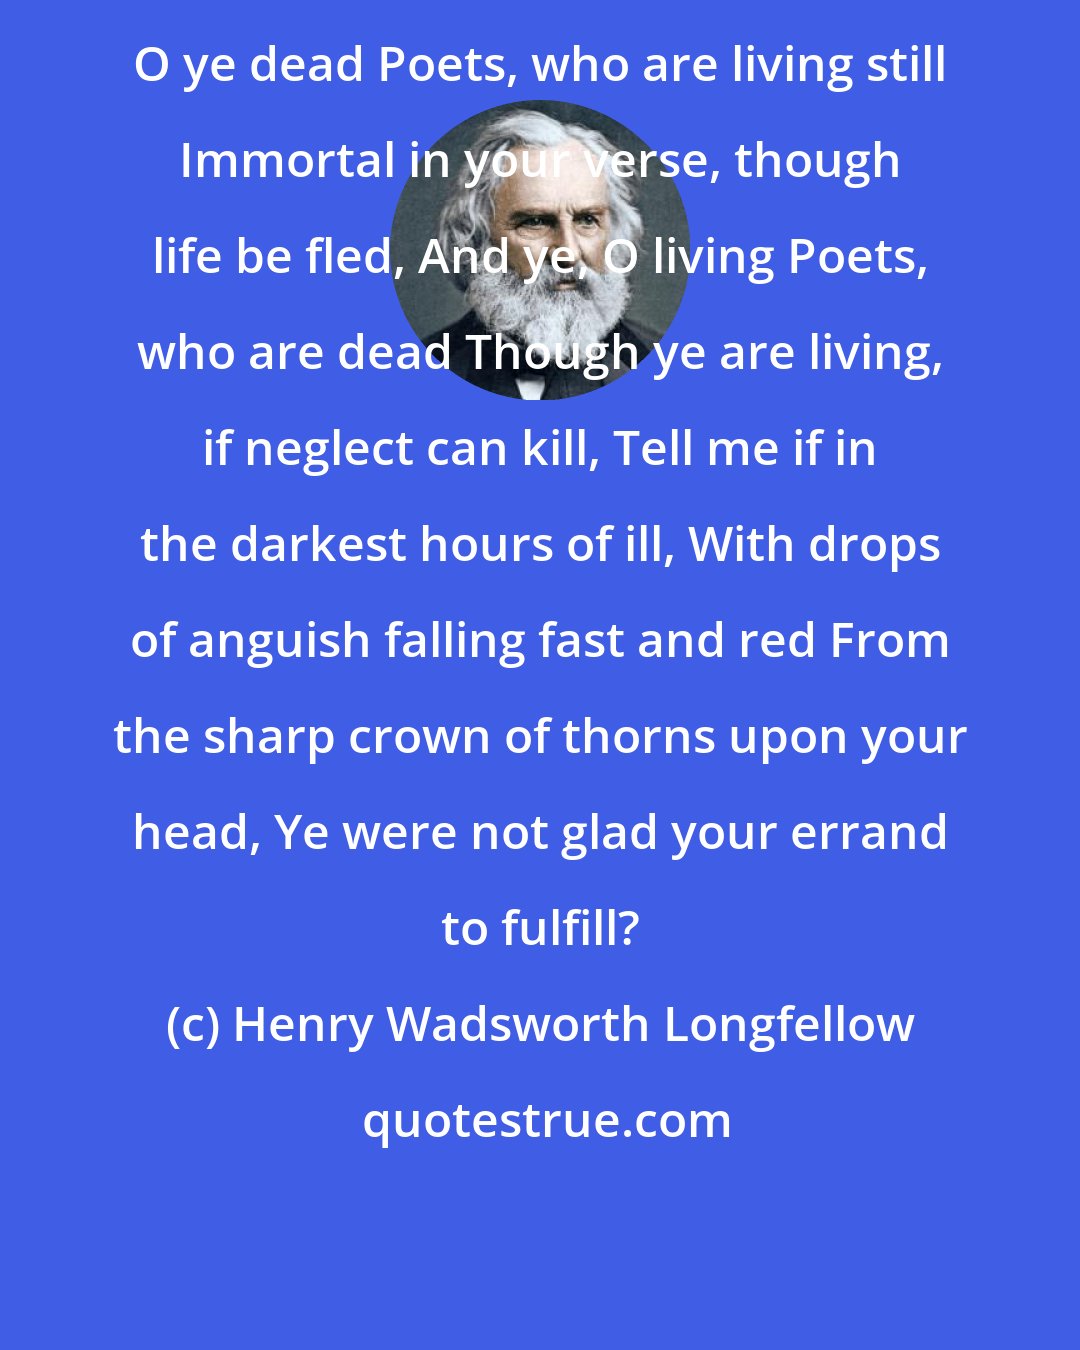 Henry Wadsworth Longfellow: O ye dead Poets, who are living still Immortal in your verse, though life be fled, And ye, O living Poets, who are dead Though ye are living, if neglect can kill, Tell me if in the darkest hours of ill, With drops of anguish falling fast and red From the sharp crown of thorns upon your head, Ye were not glad your errand to fulfill?